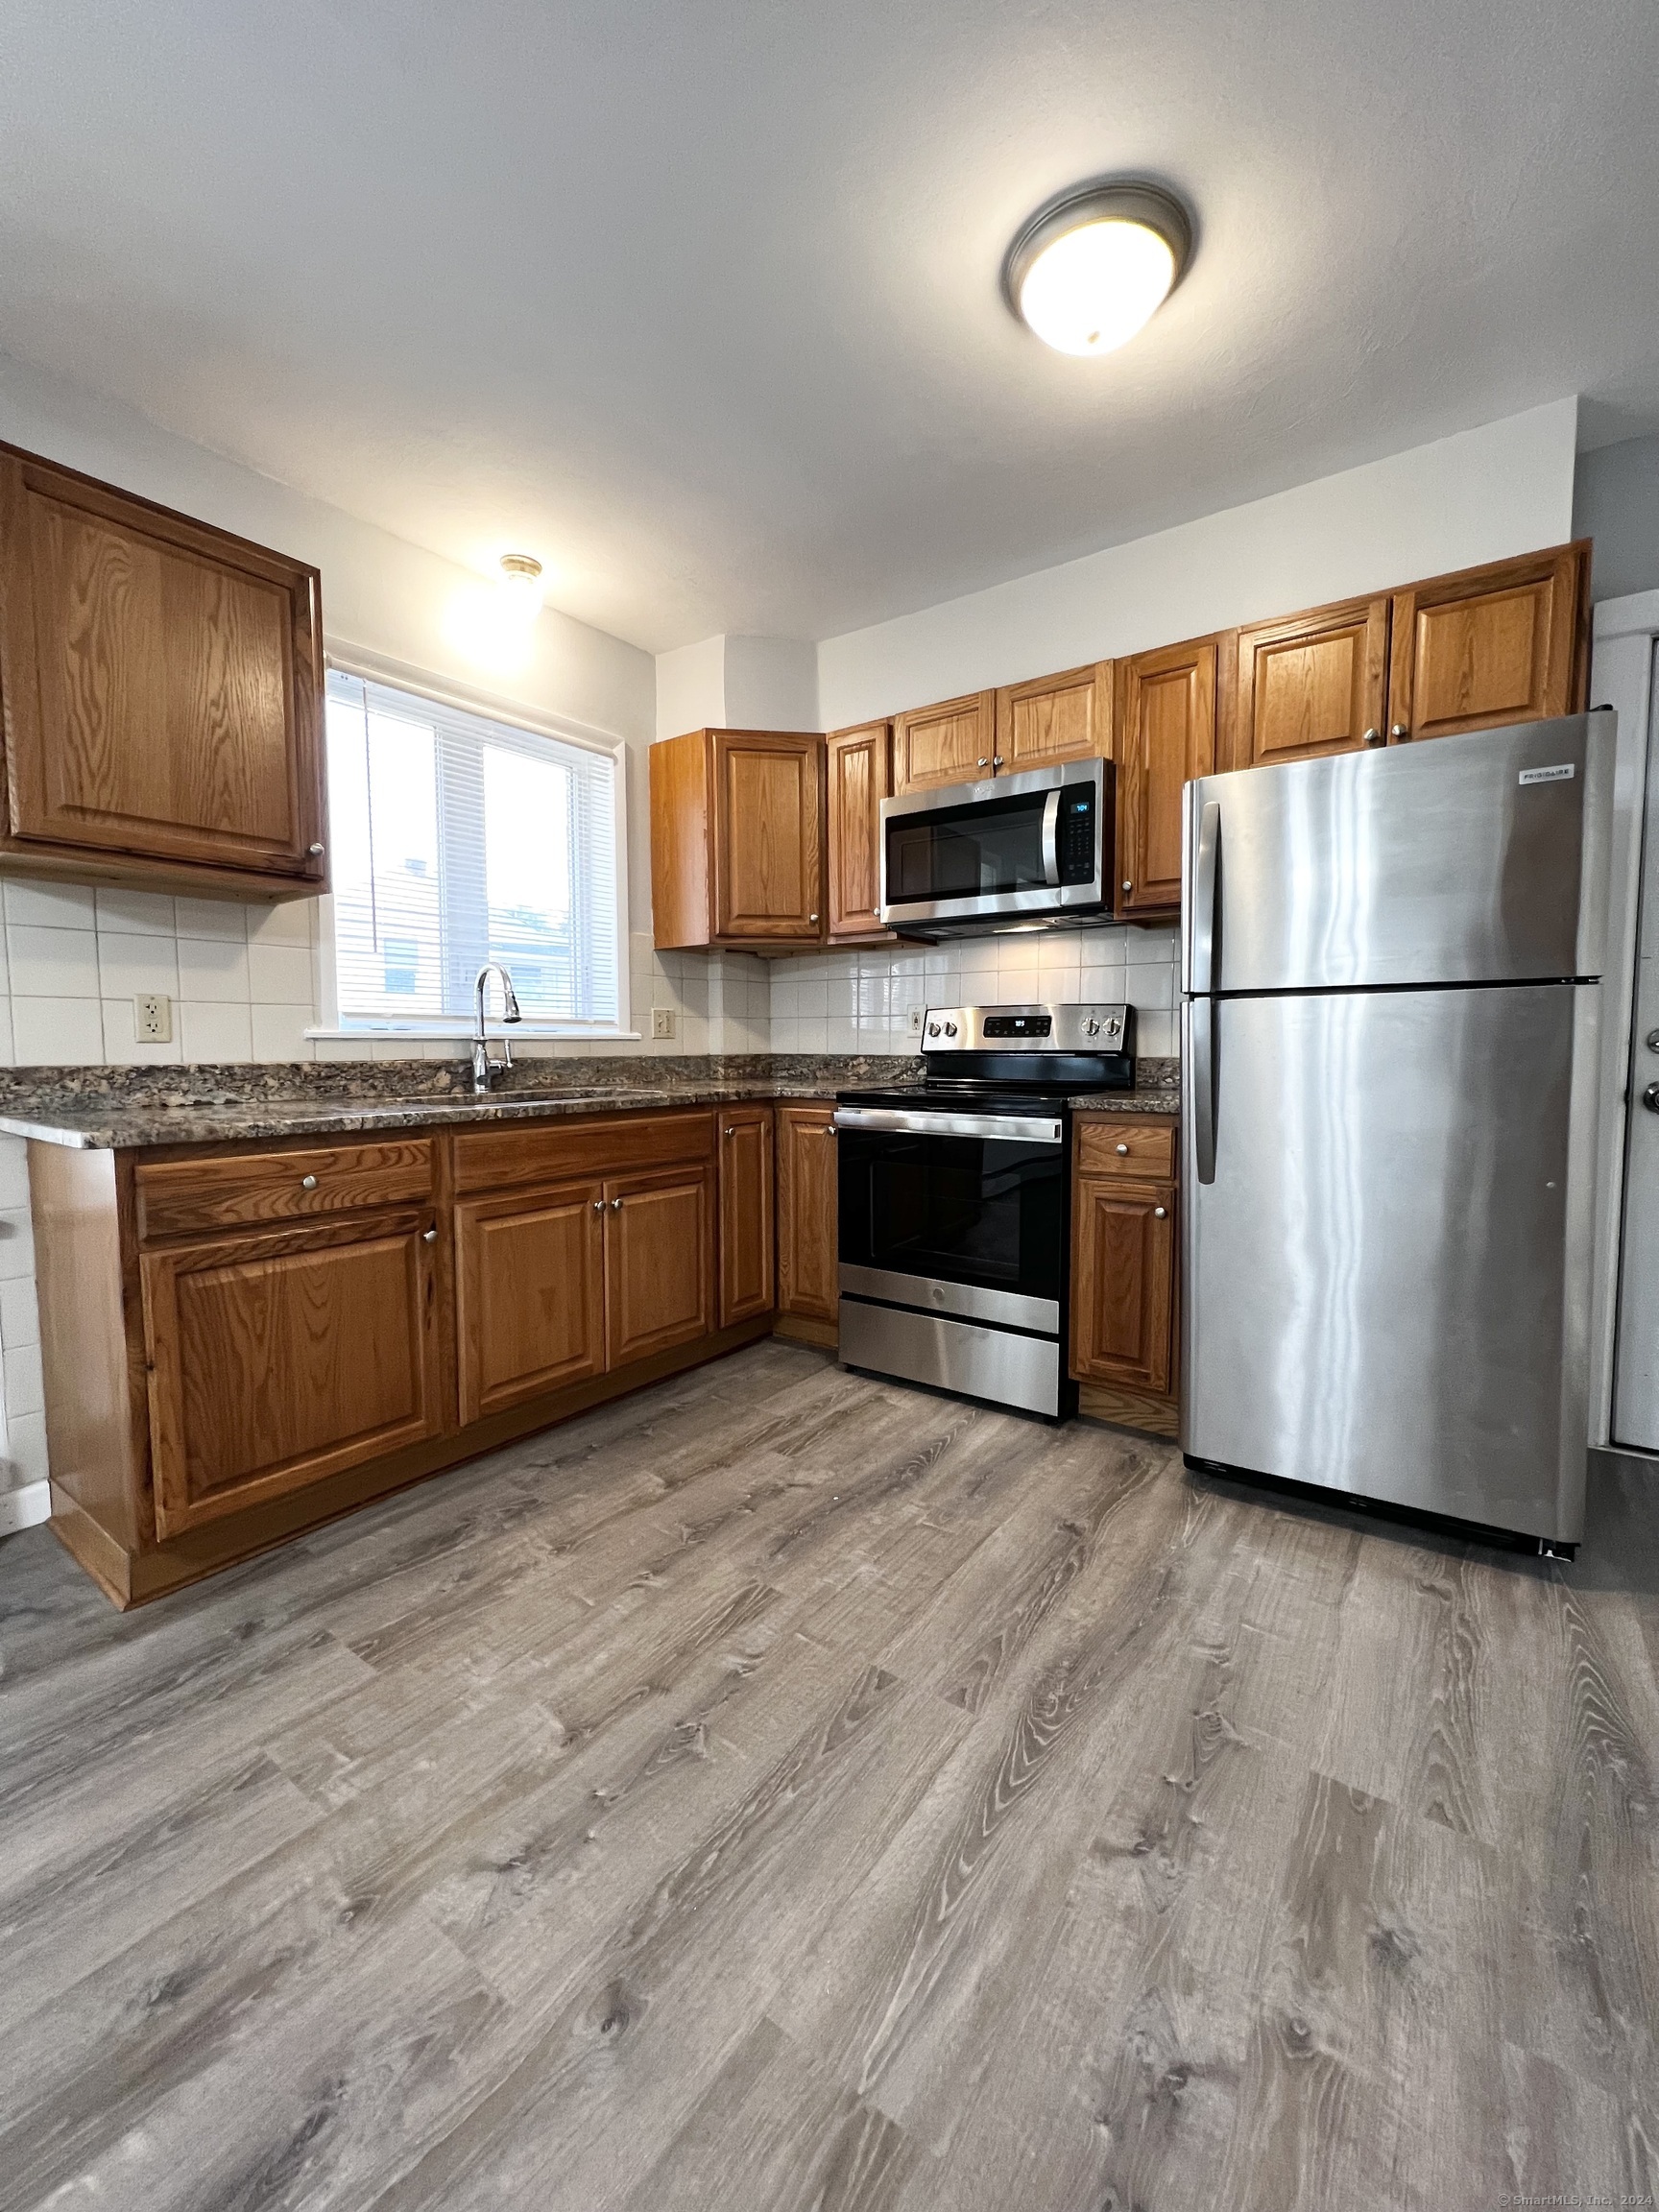 528 High Street 1, Middletown, Connecticut - 2 Bedrooms  
1 Bathrooms  
5 Rooms - 